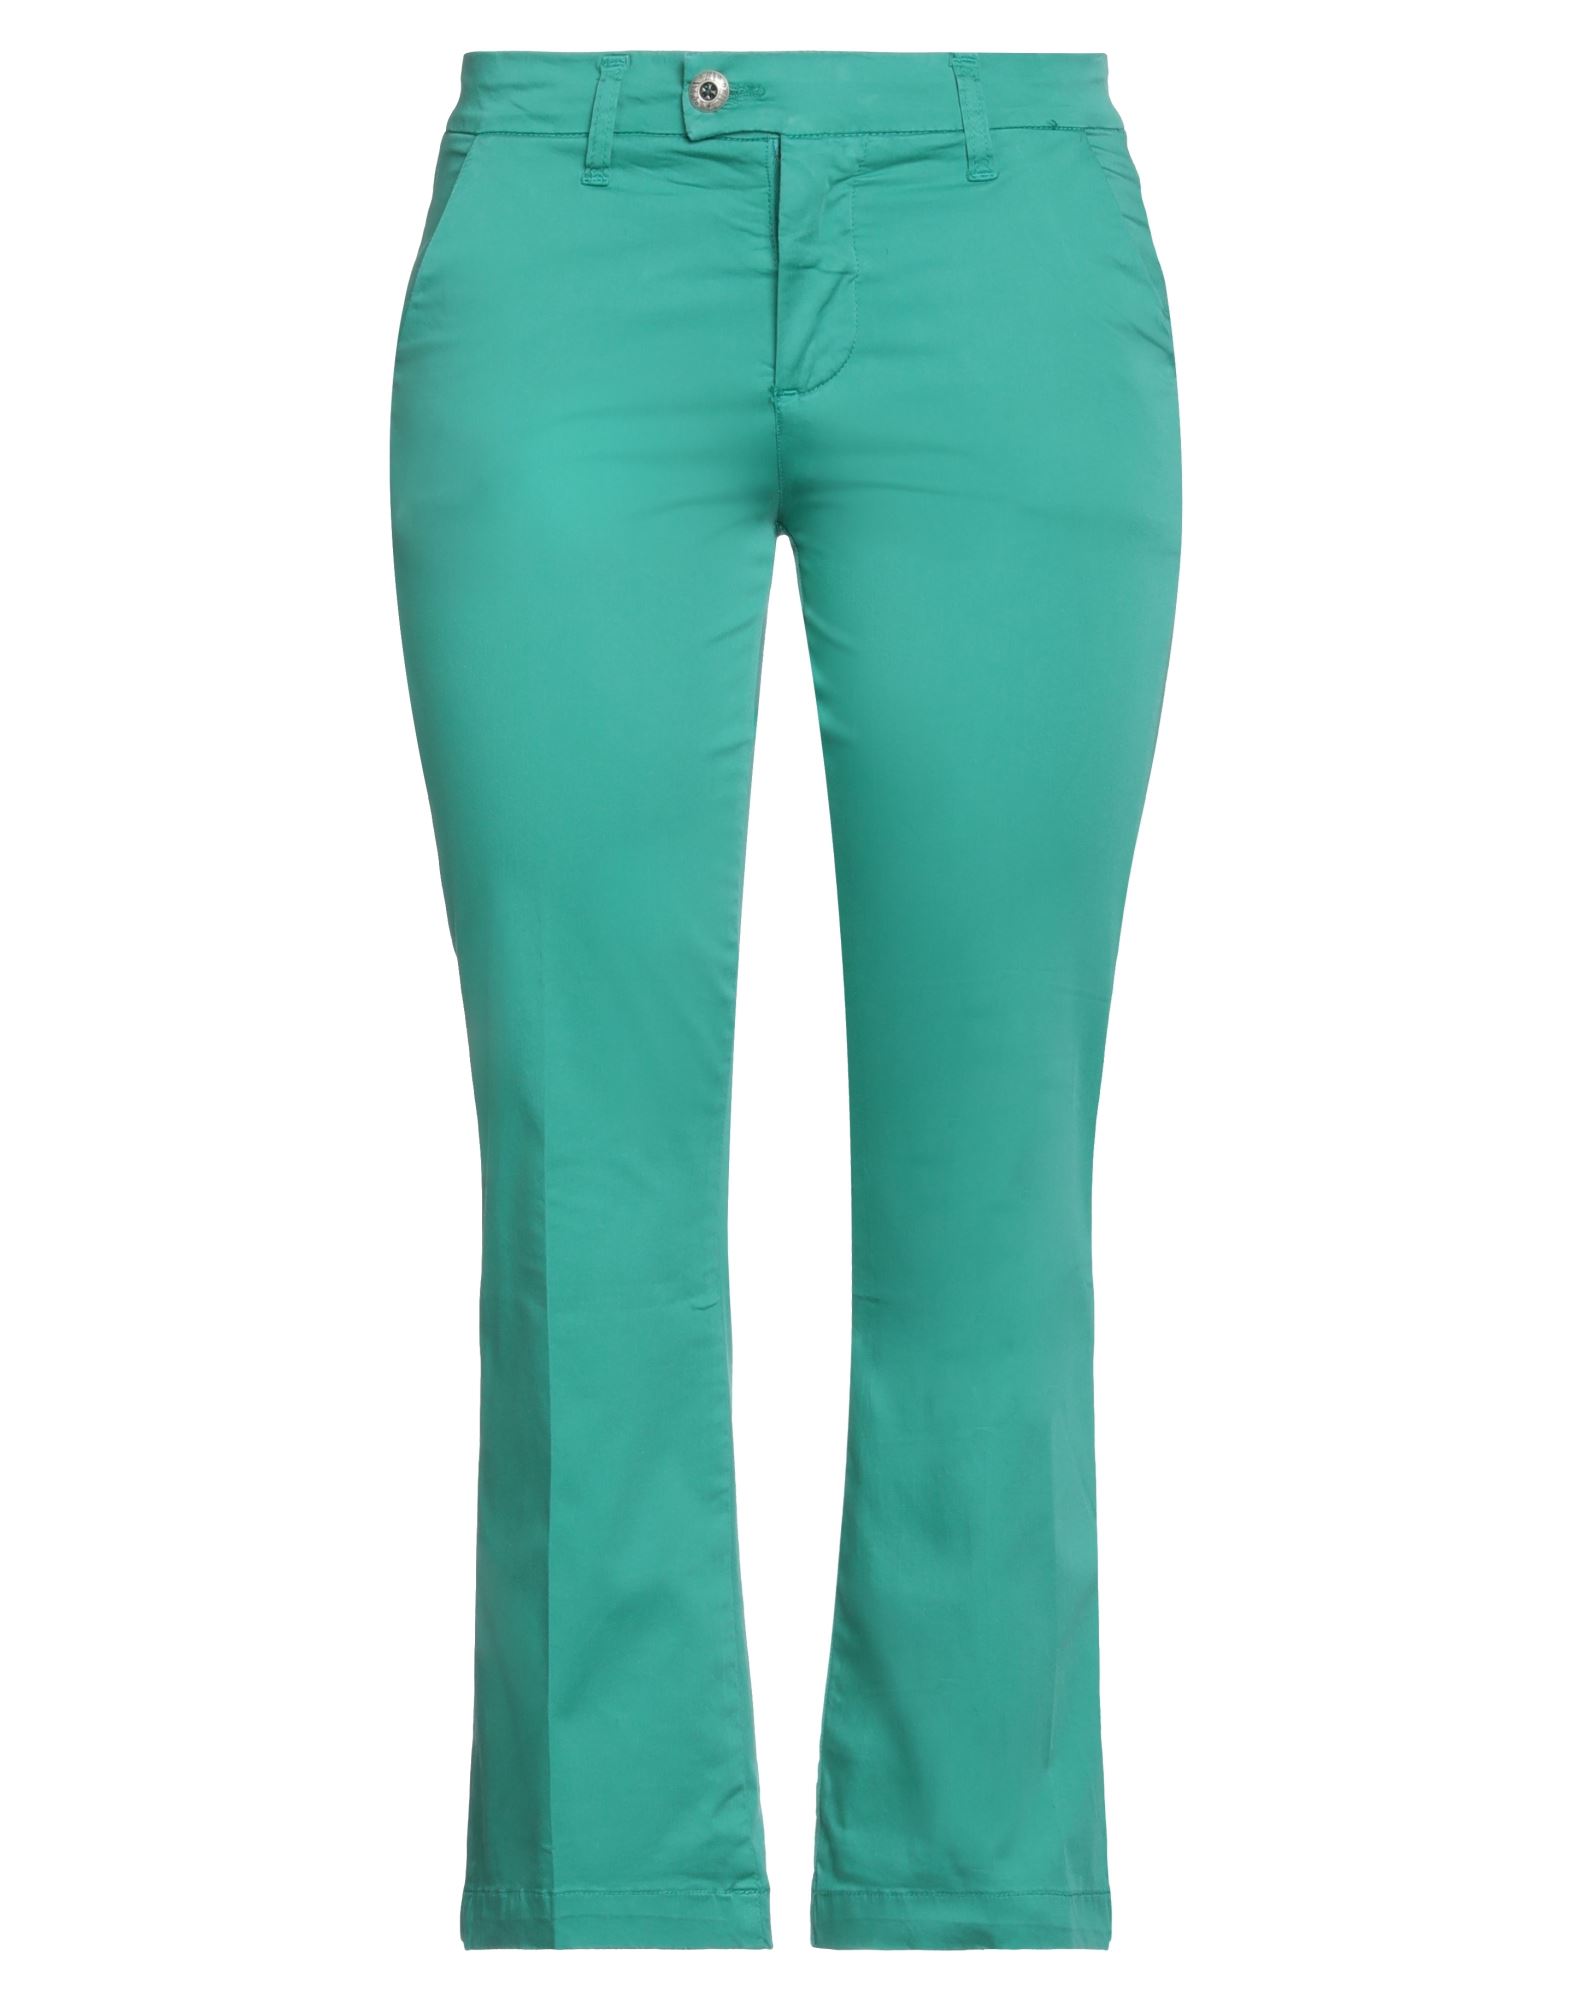 Noir And Bleu Cropped Pants In Green